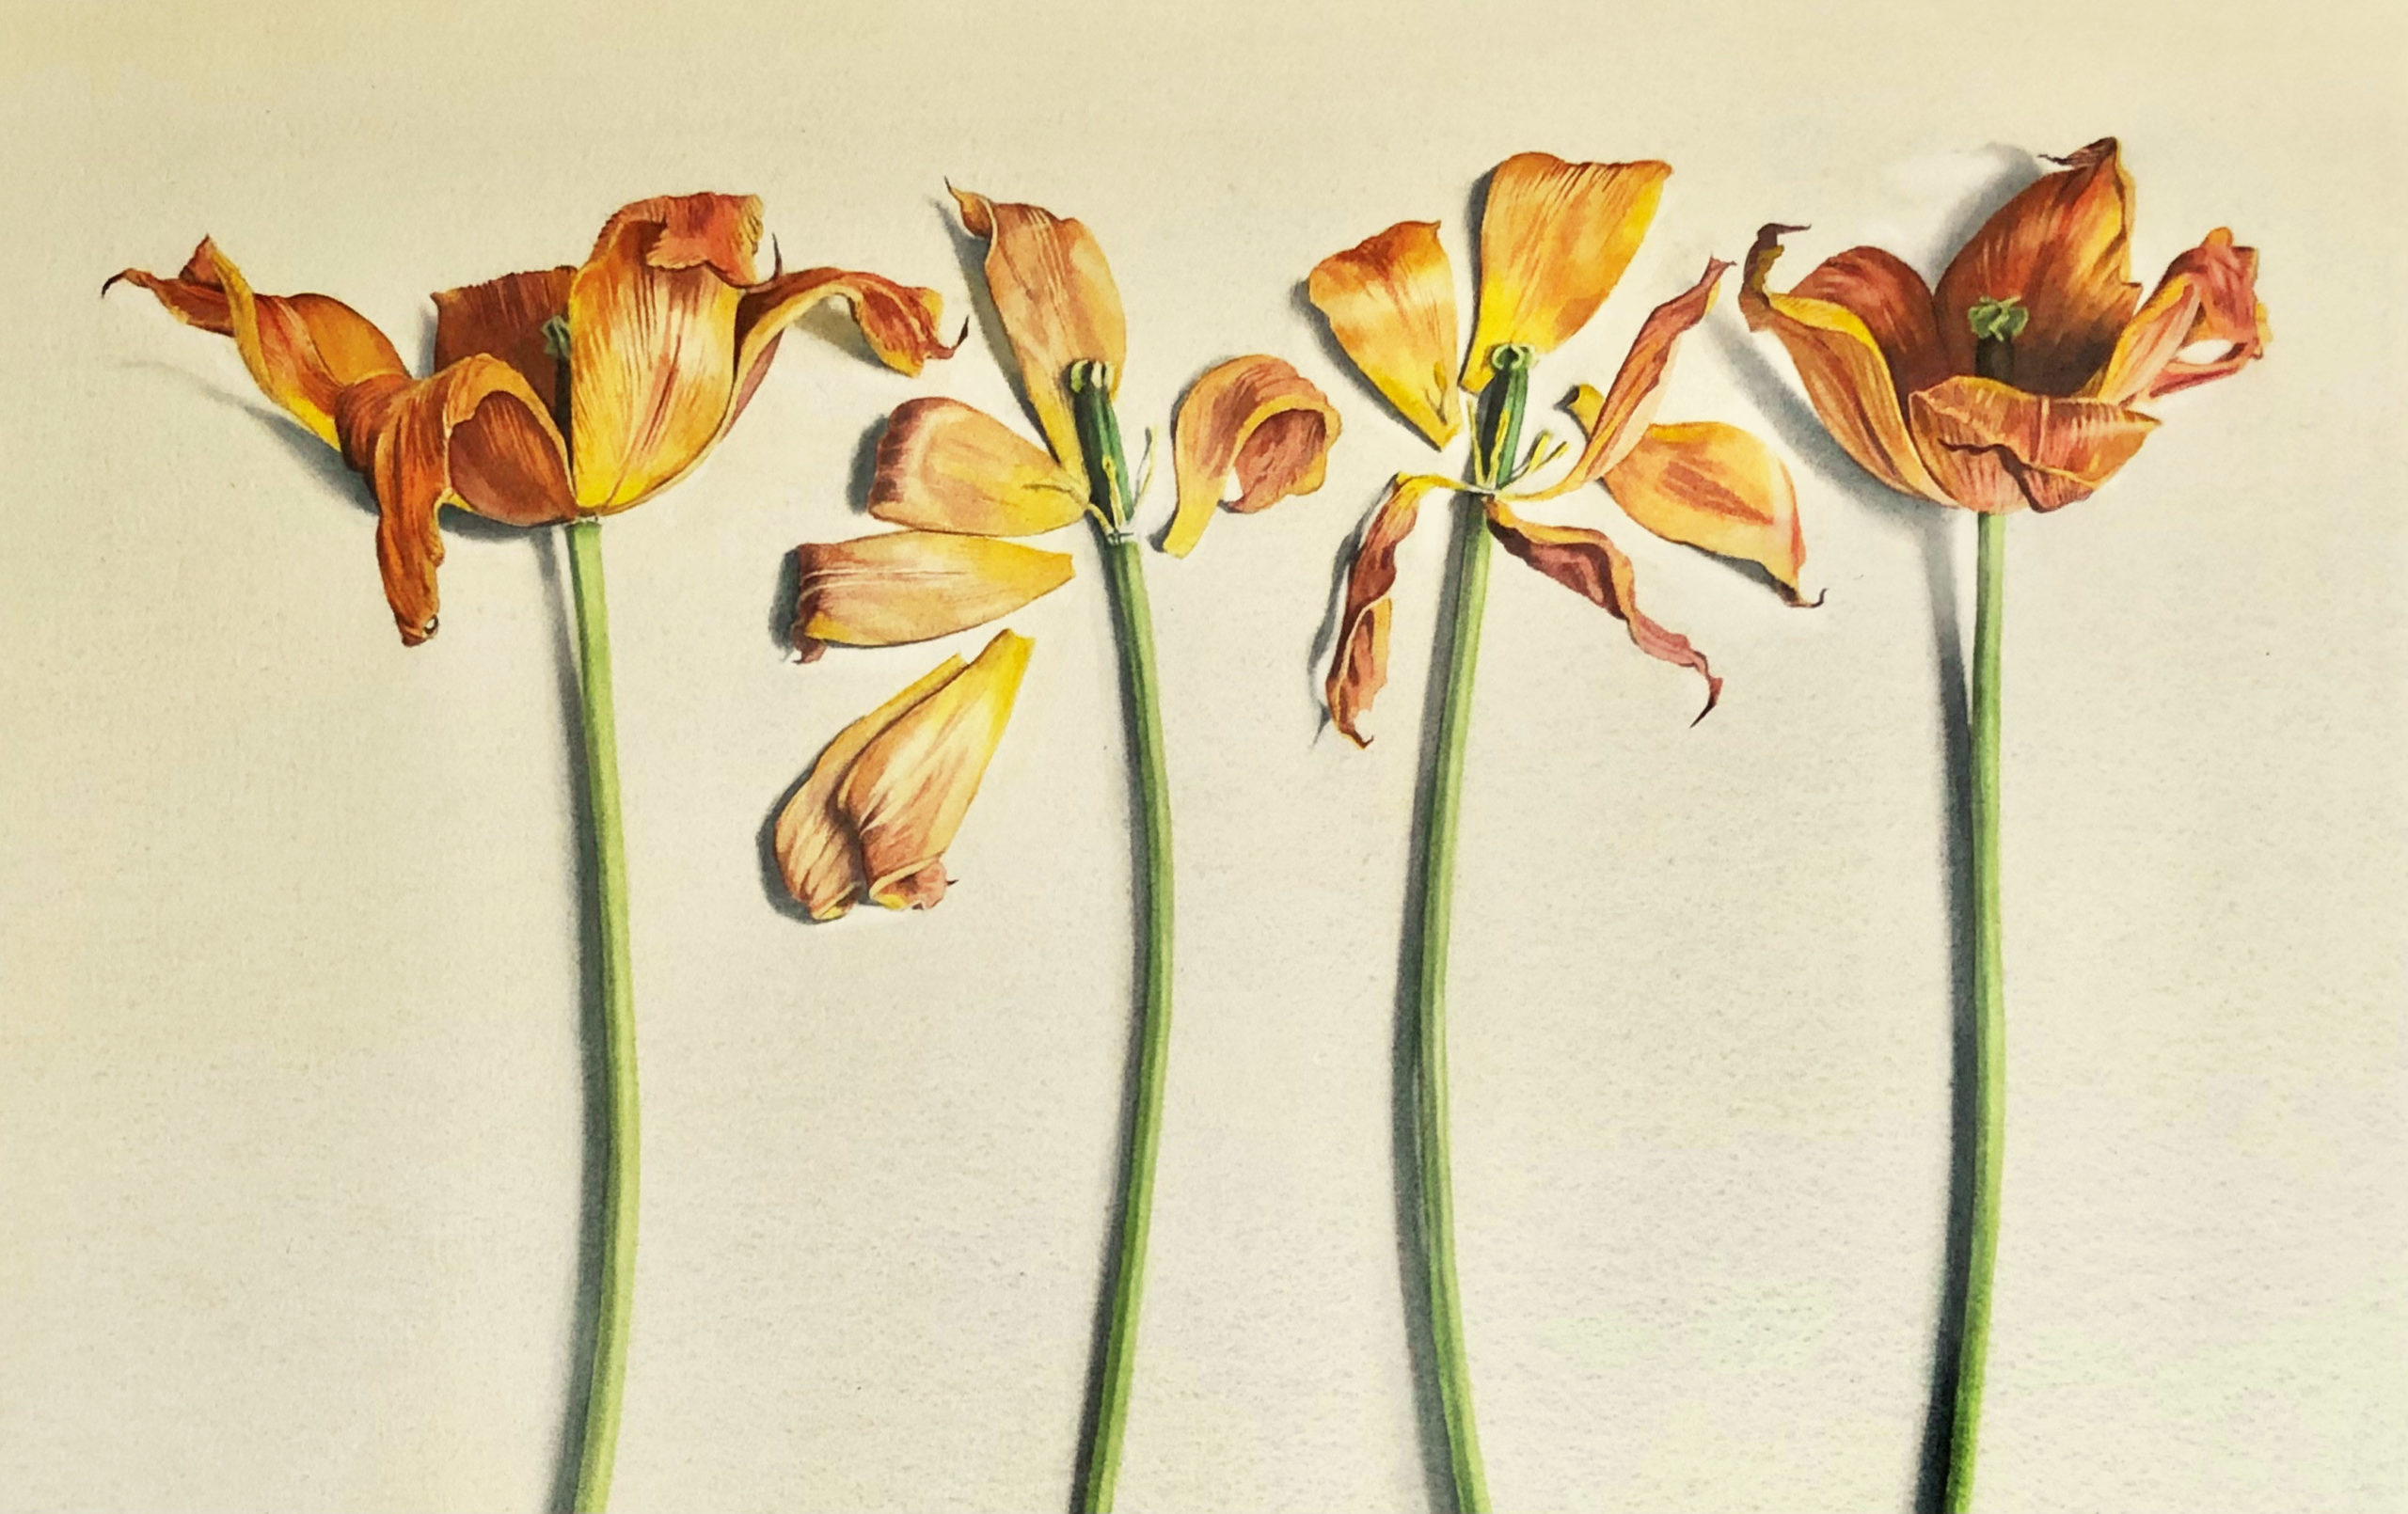 The tulips are over 37 x 58cm